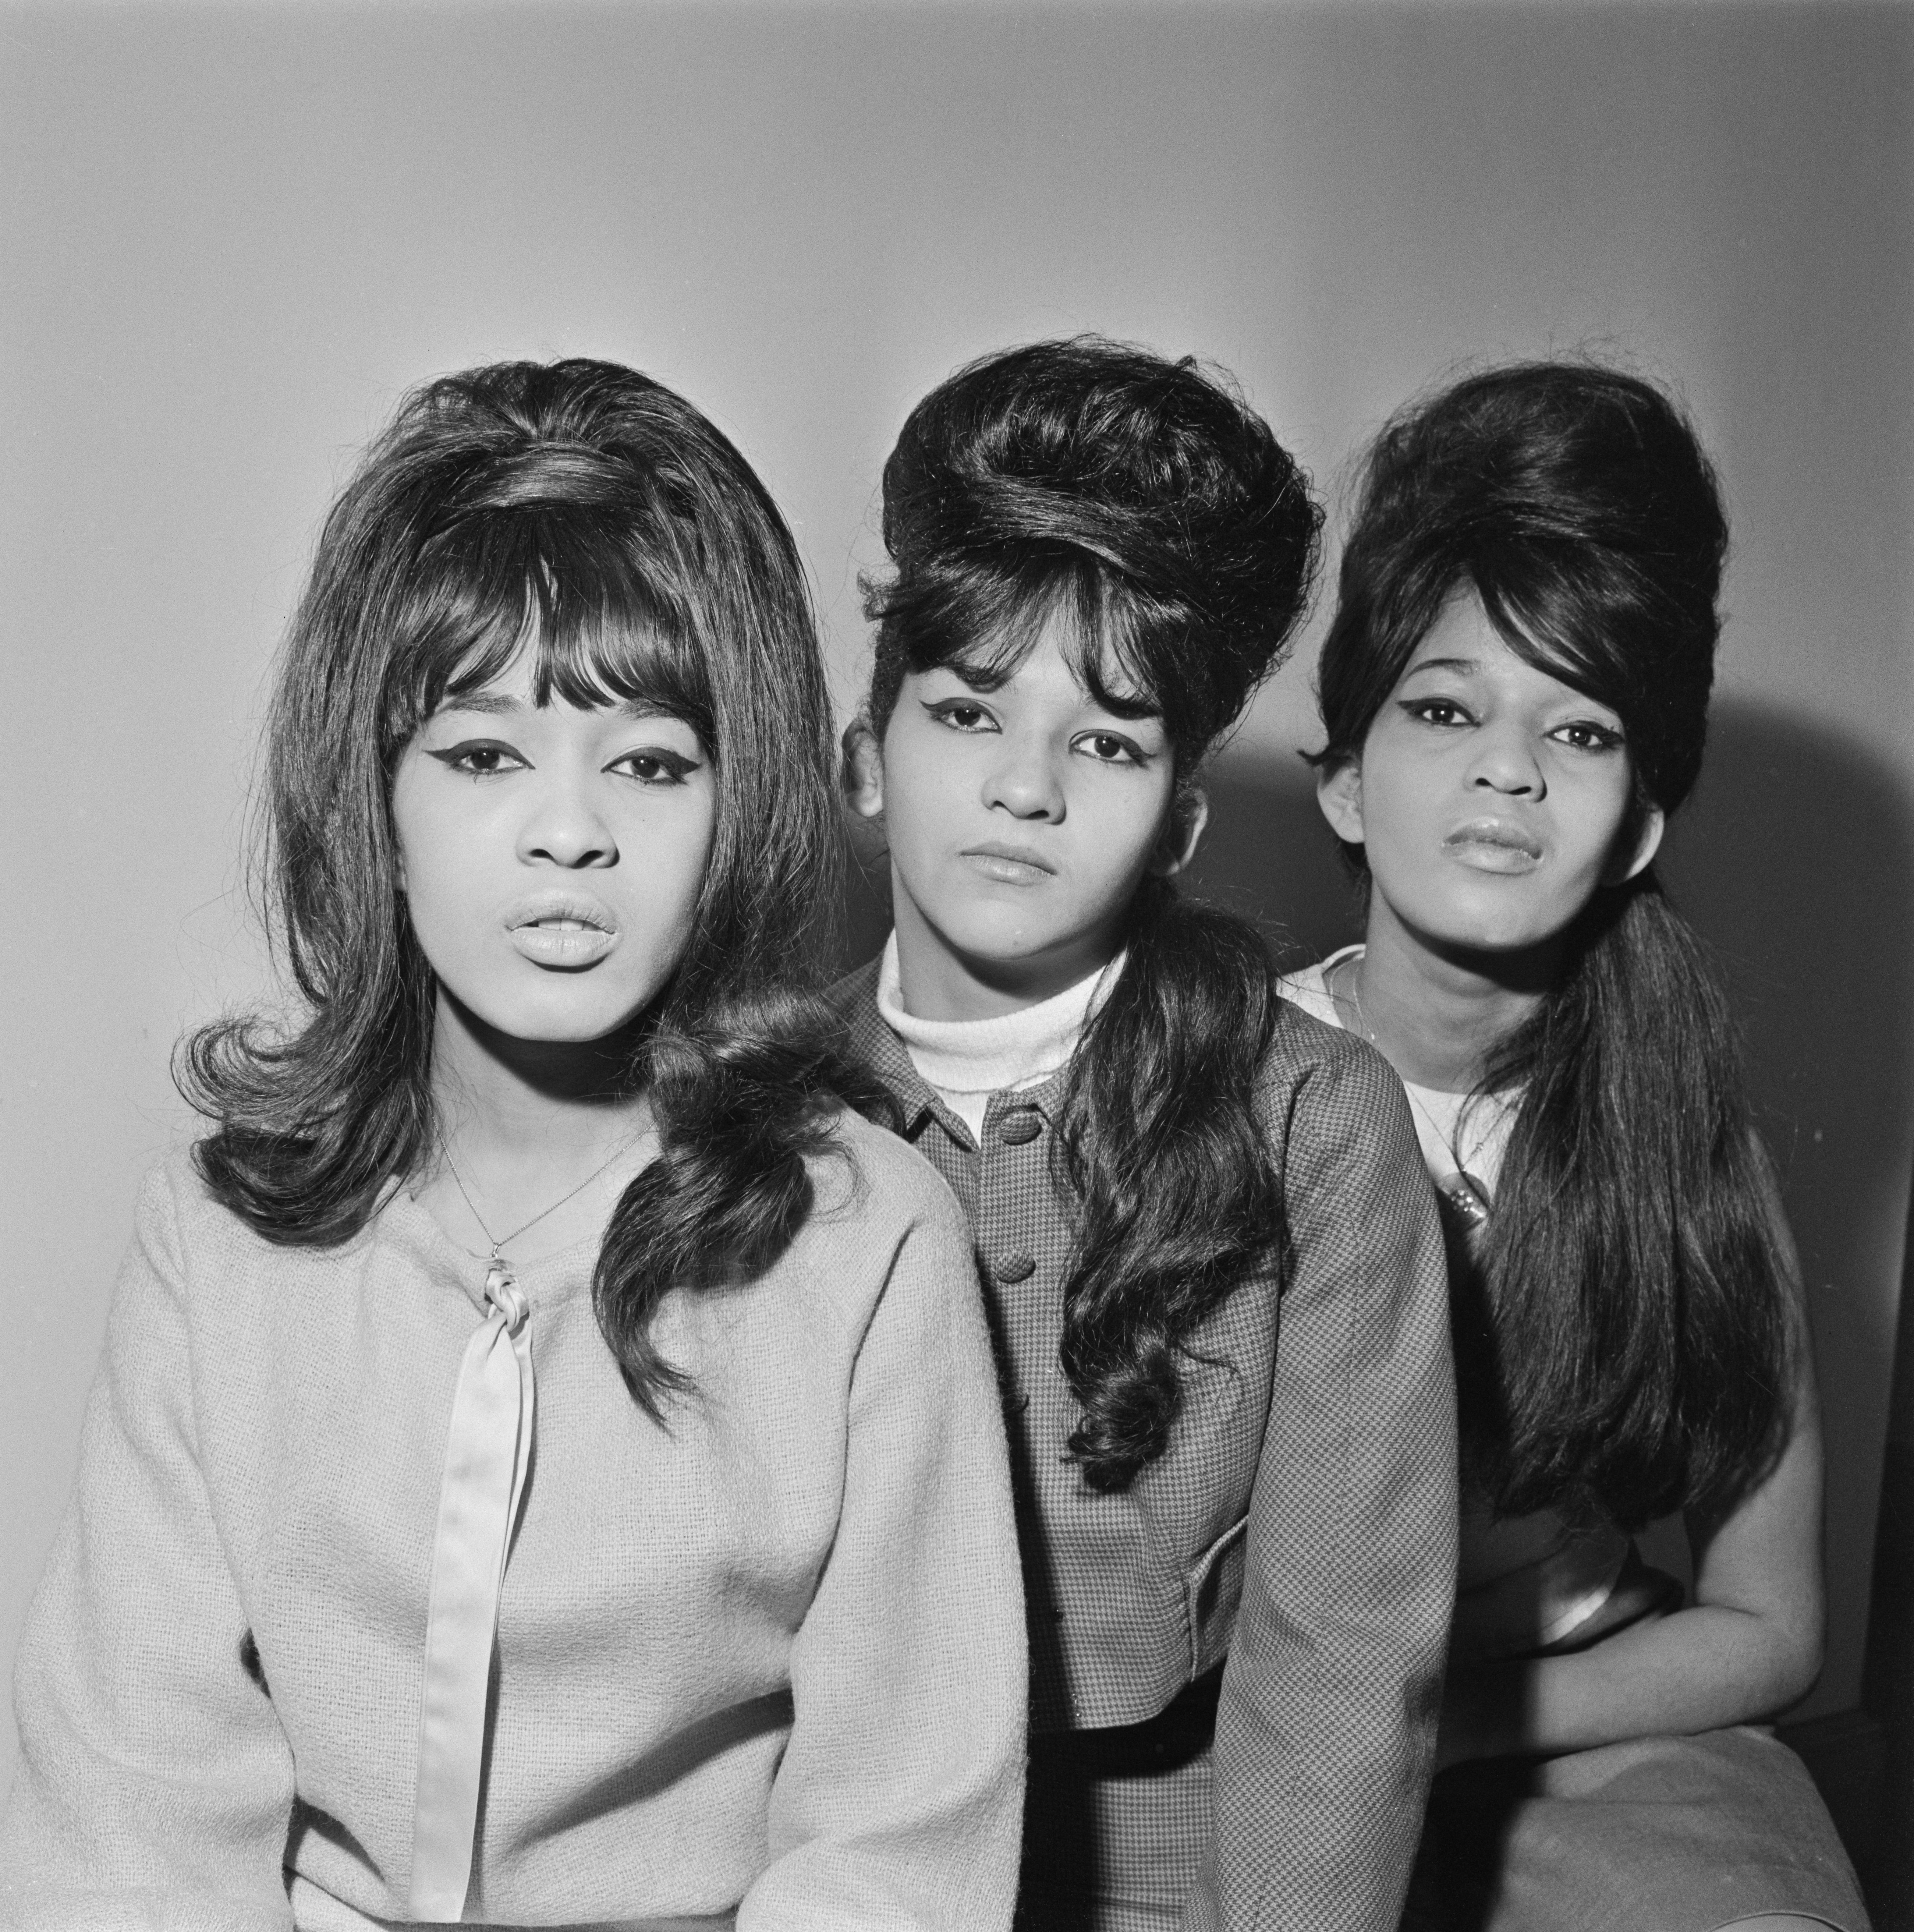 The Ronettes, Ronnie Spector, Nedra Talley and Estelle Bennett in 1964. | Source: Getty Images